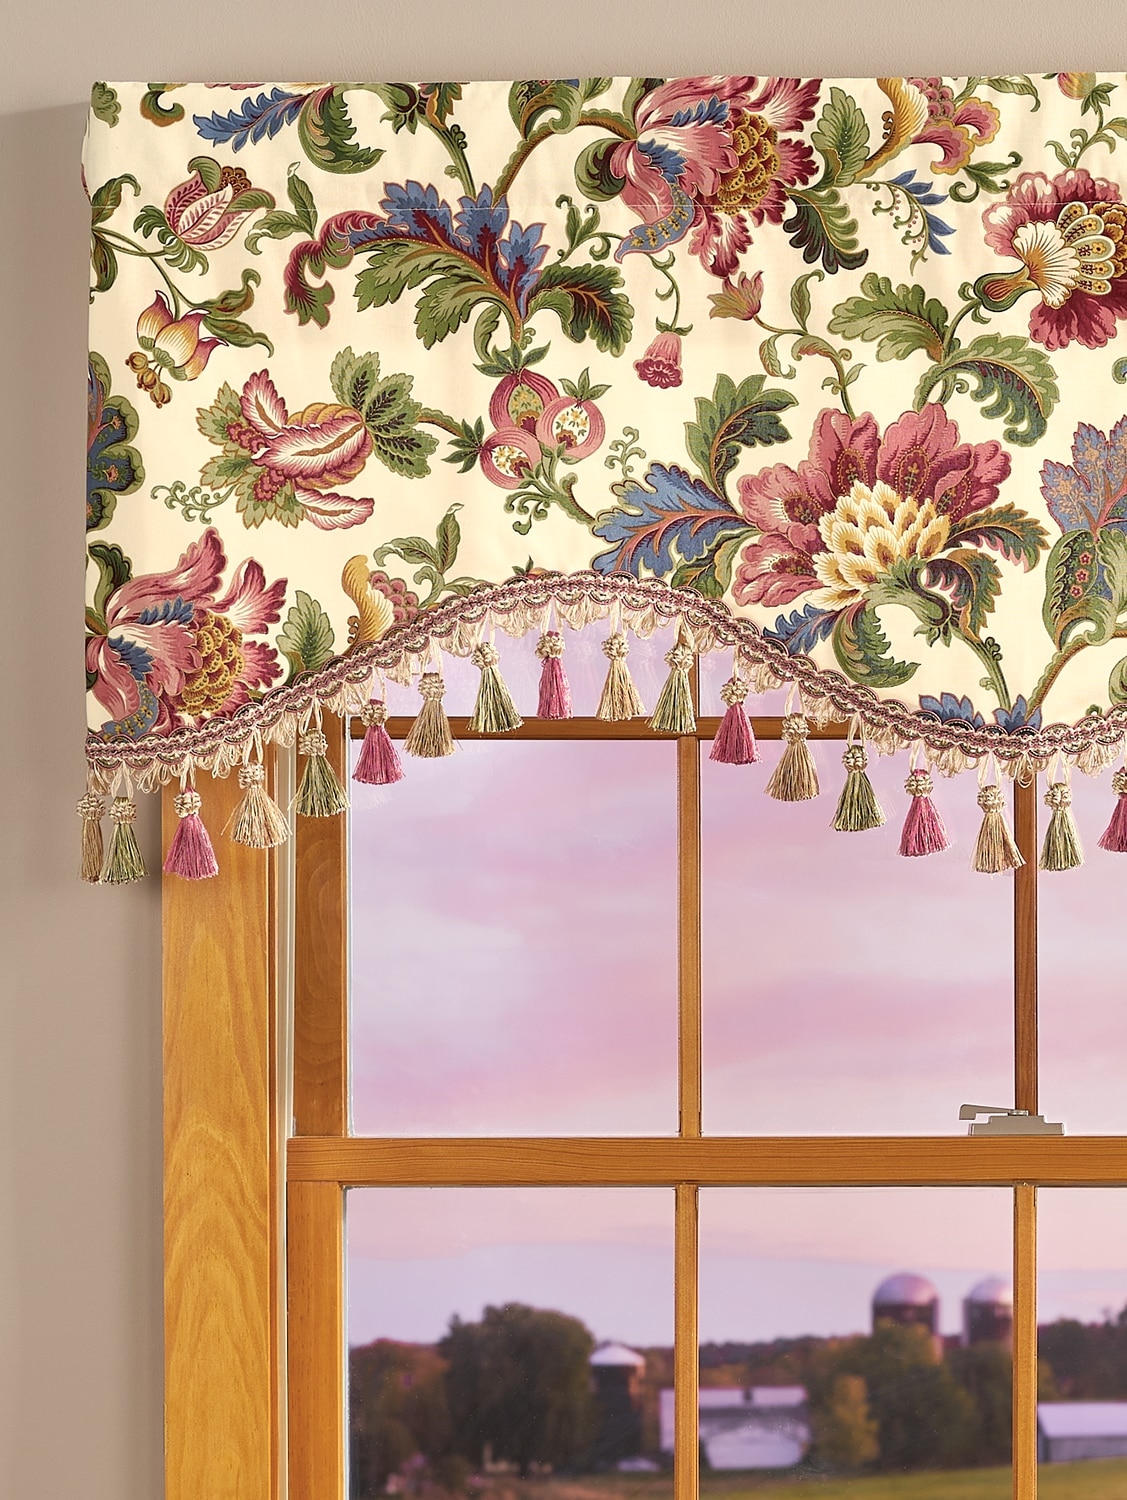 1 Geranium Scalloped Layered Lined Floral Country Window Valance 58" x 15" 